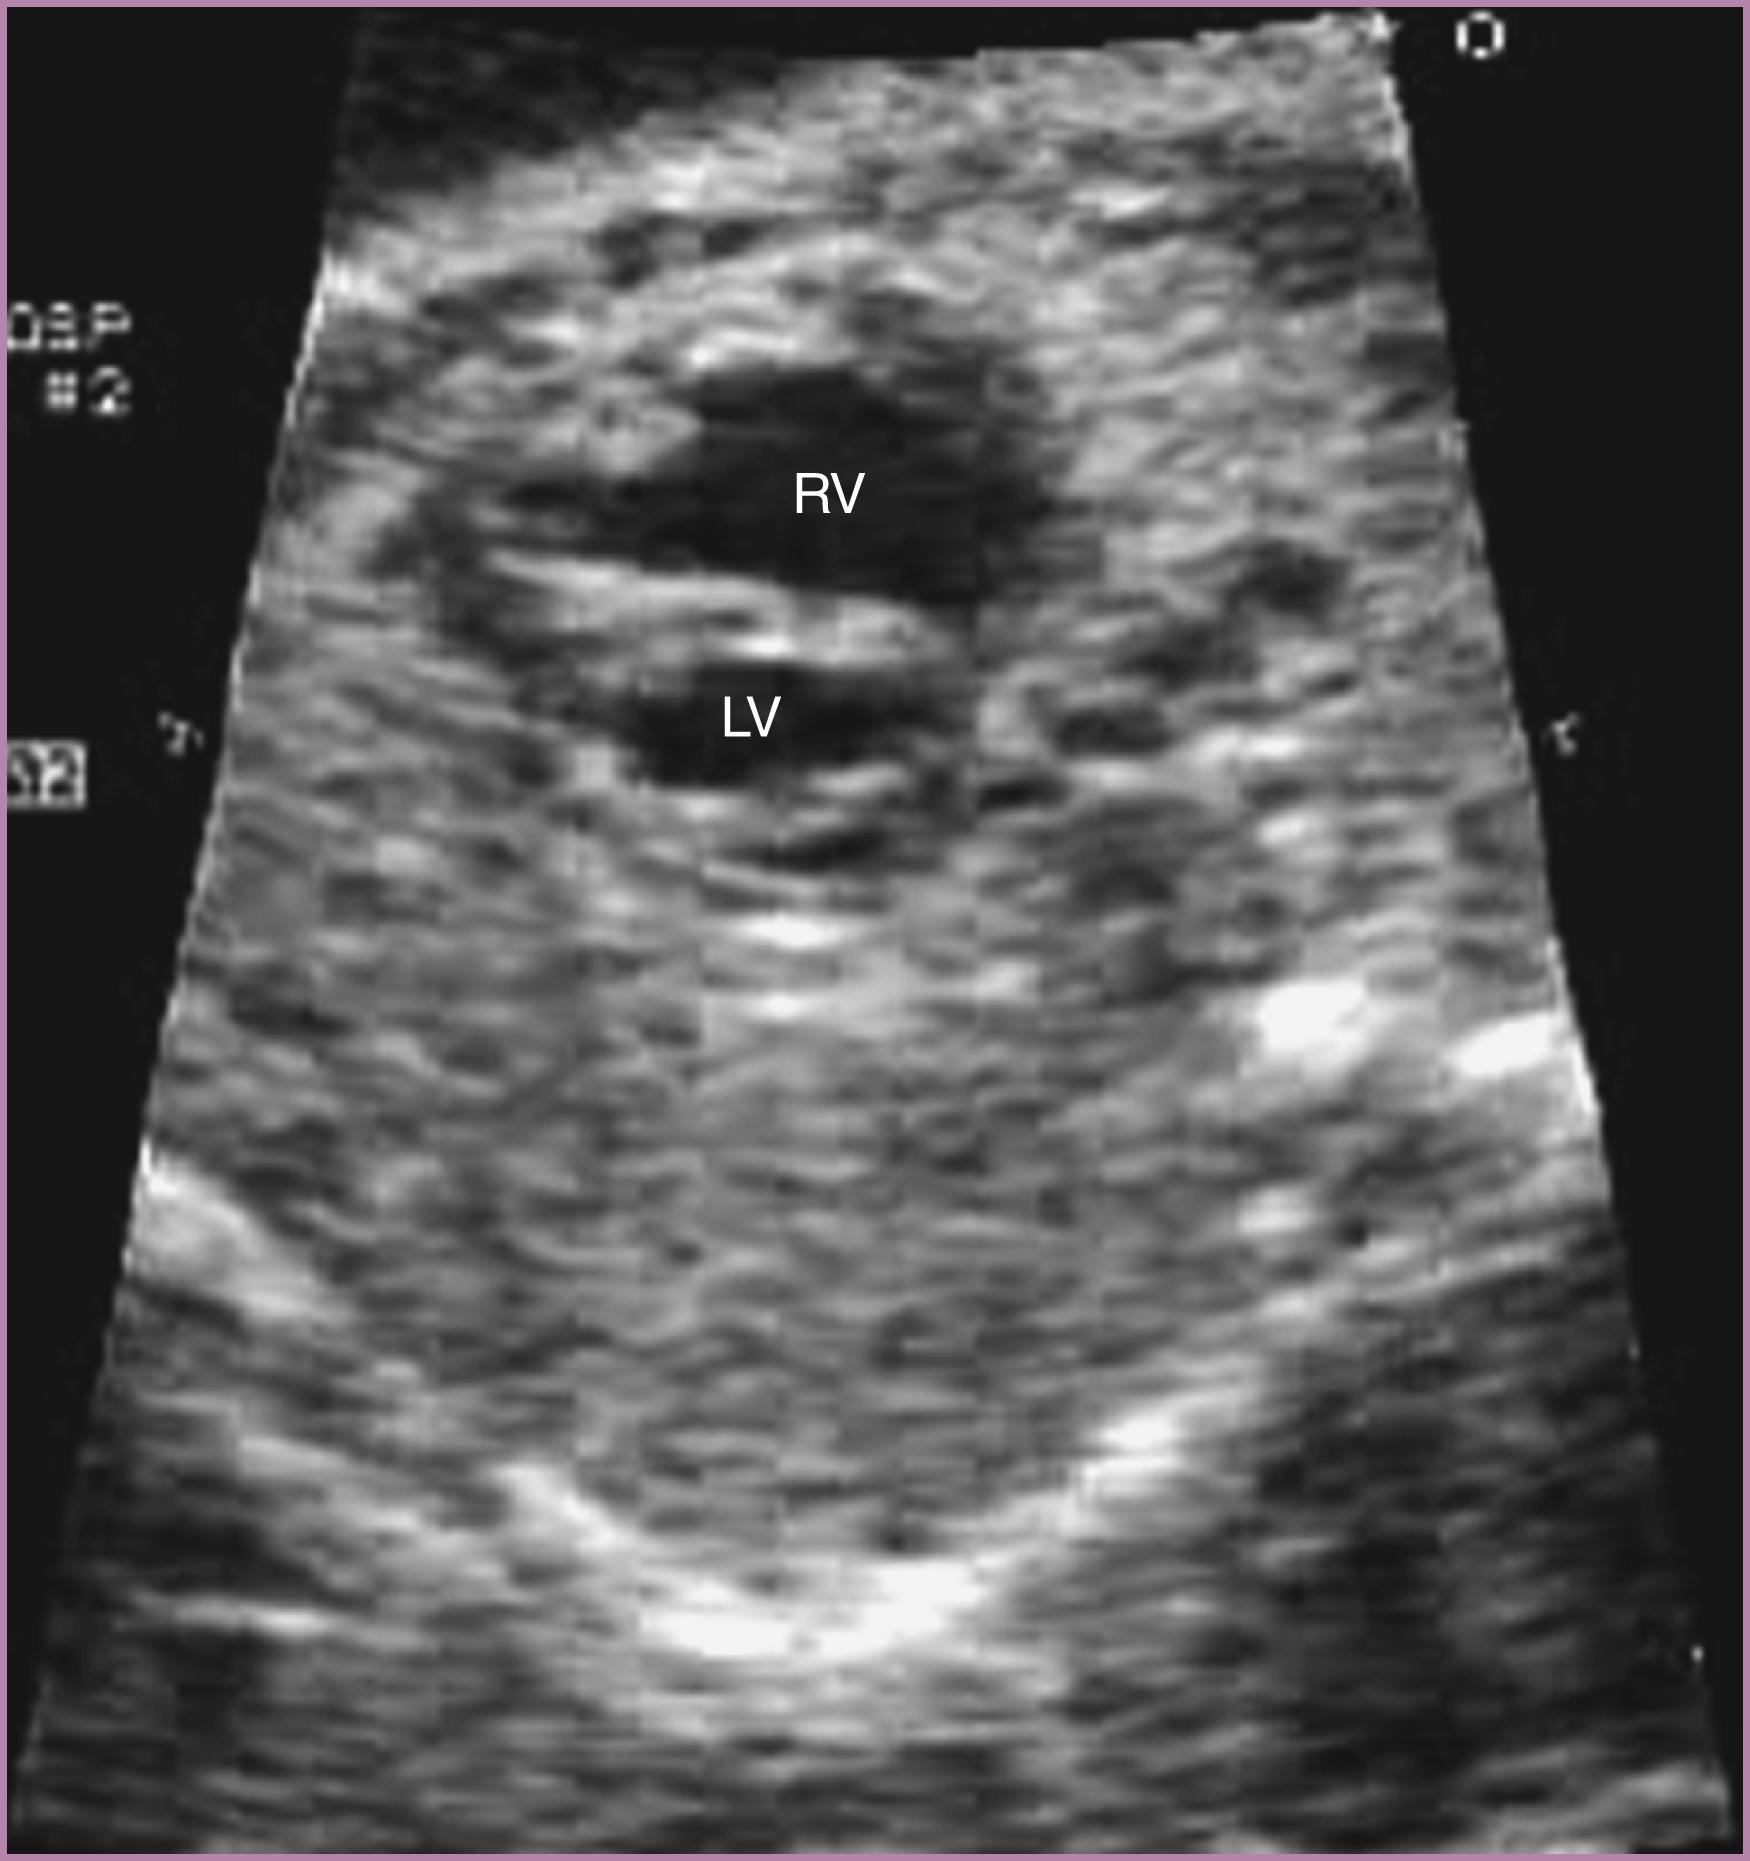 Figure 23.20, Fetal echocardiographic image of apical short-axis view.